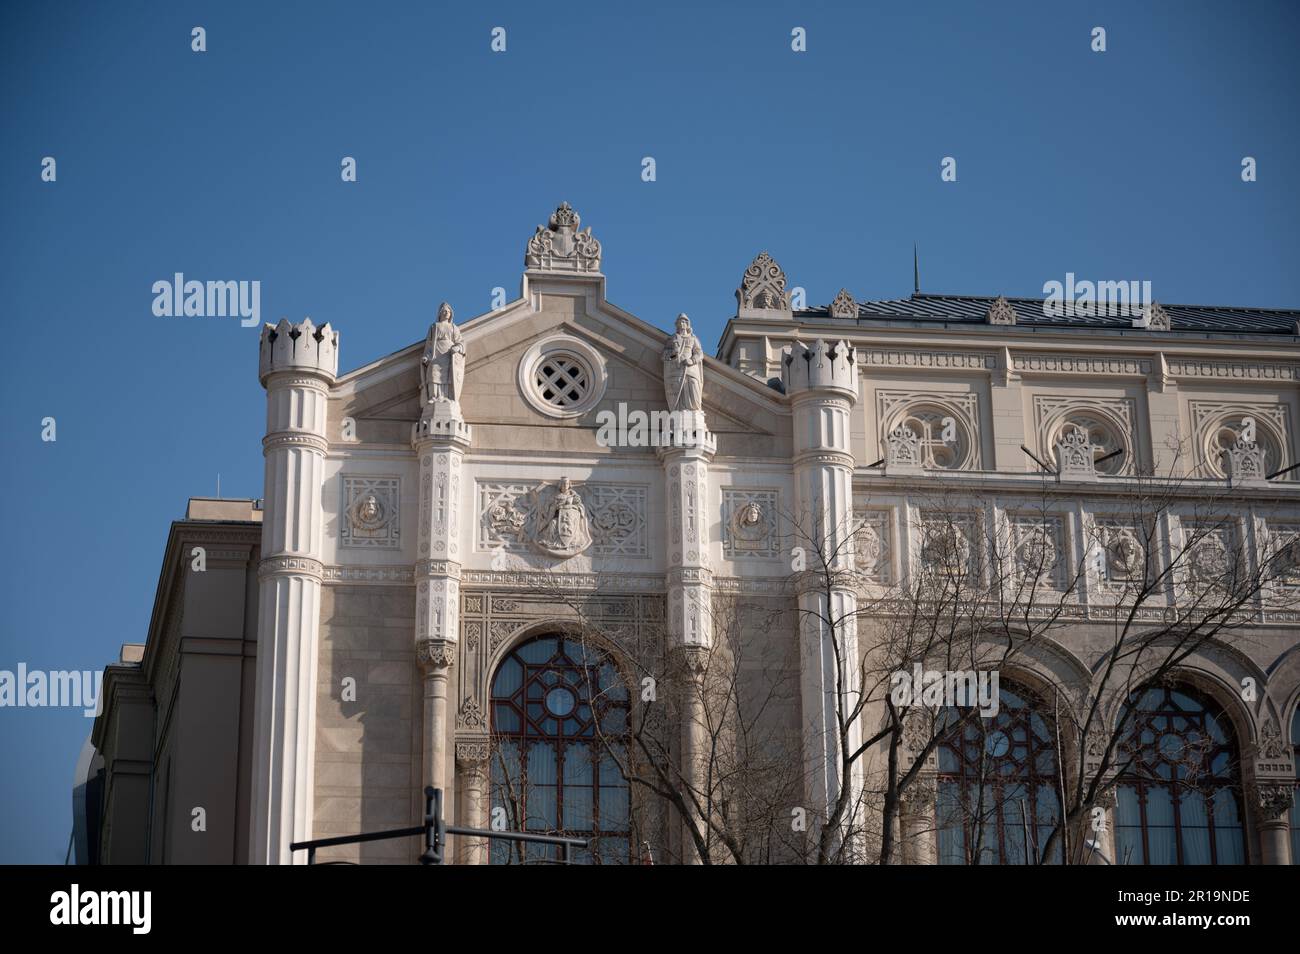 Ornate building on the banks of the River Danube in Budapest, Hungary. Stock Photo